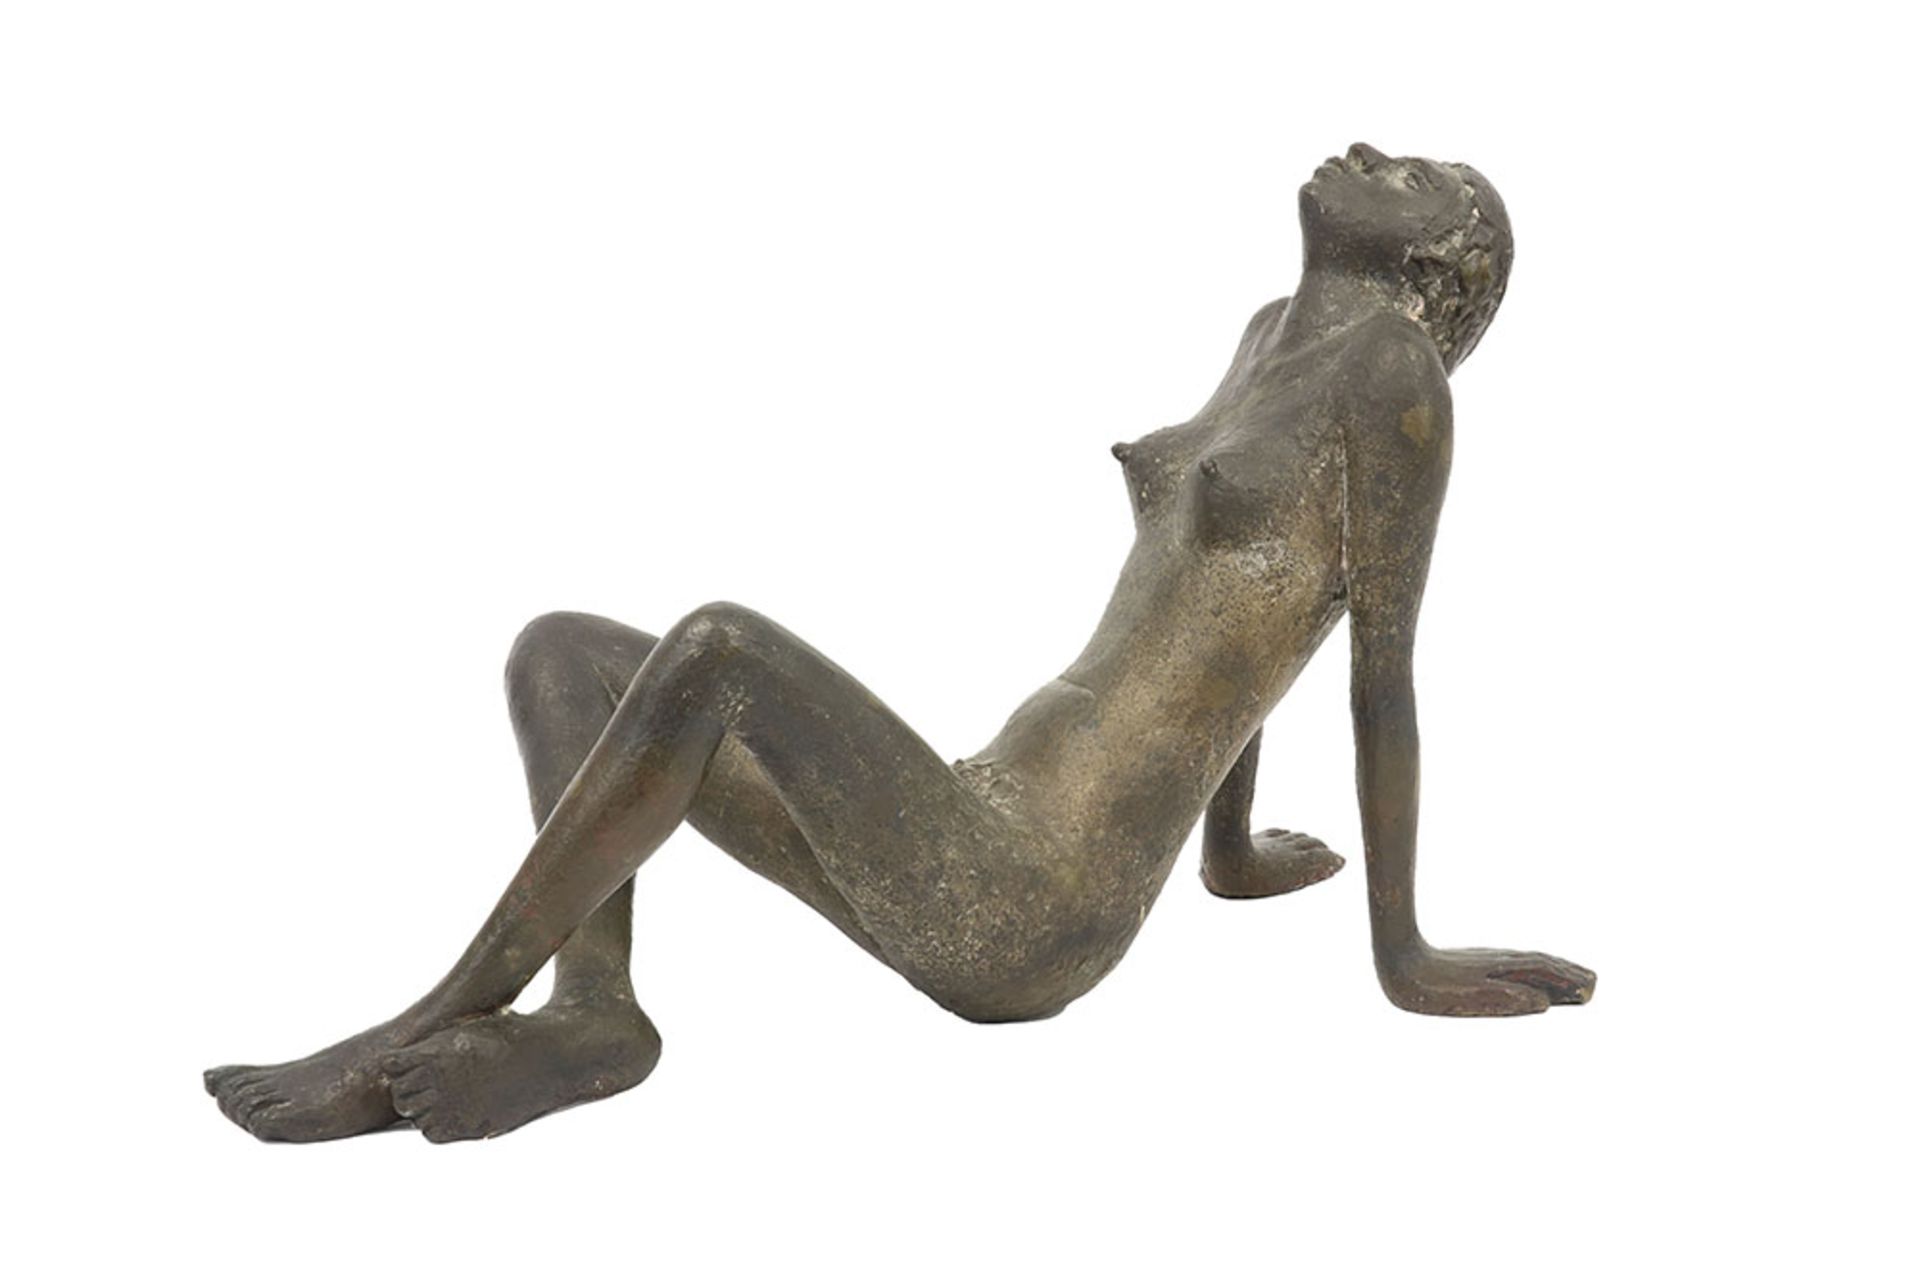 20th Cent. Belgian sculpture in bronze - signed Georges Grard || GRARD GEORGES (1901 - 1984) - Image 2 of 4